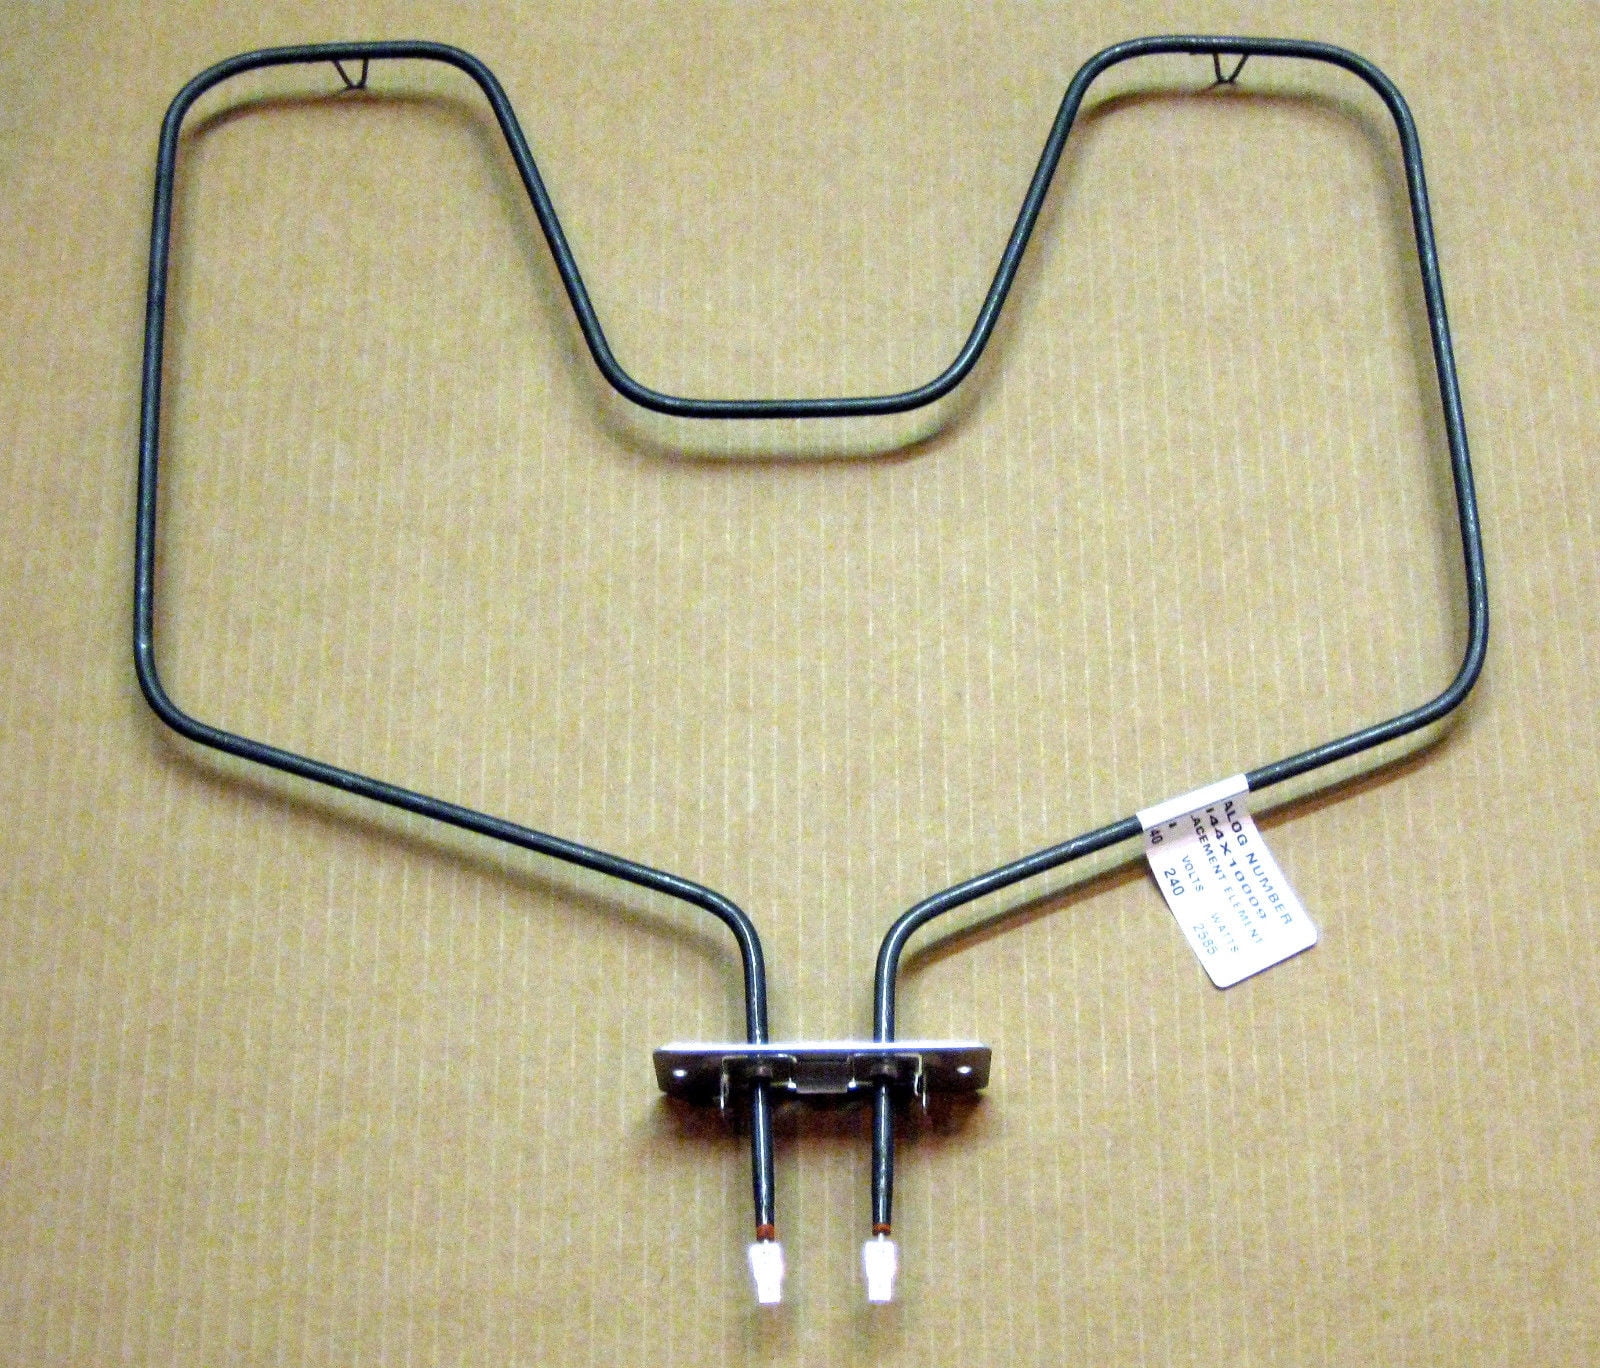 Kenmore Range Bake Heating Element PP1310955X24X8 For Frigidaire 